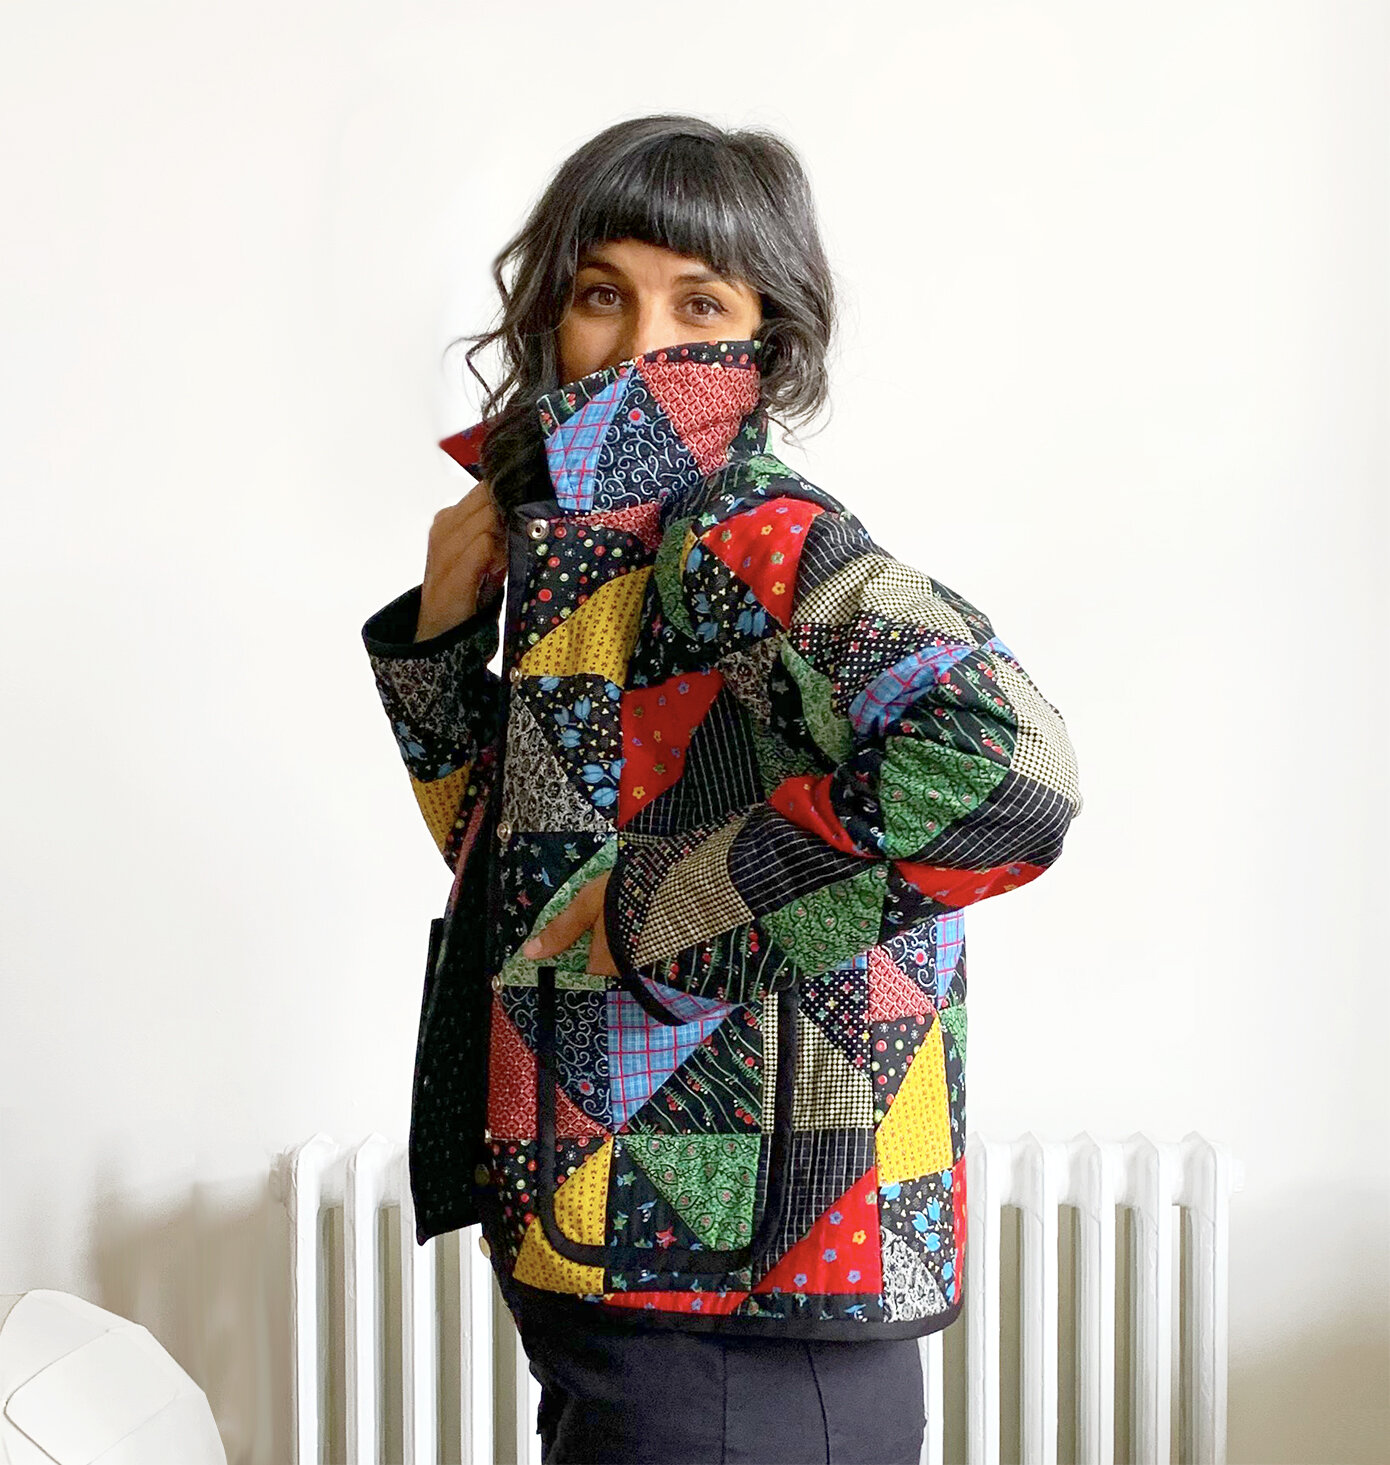 QUILTED CHEATER QUILT JACKET - Vintage Fabric Finally Gets Used